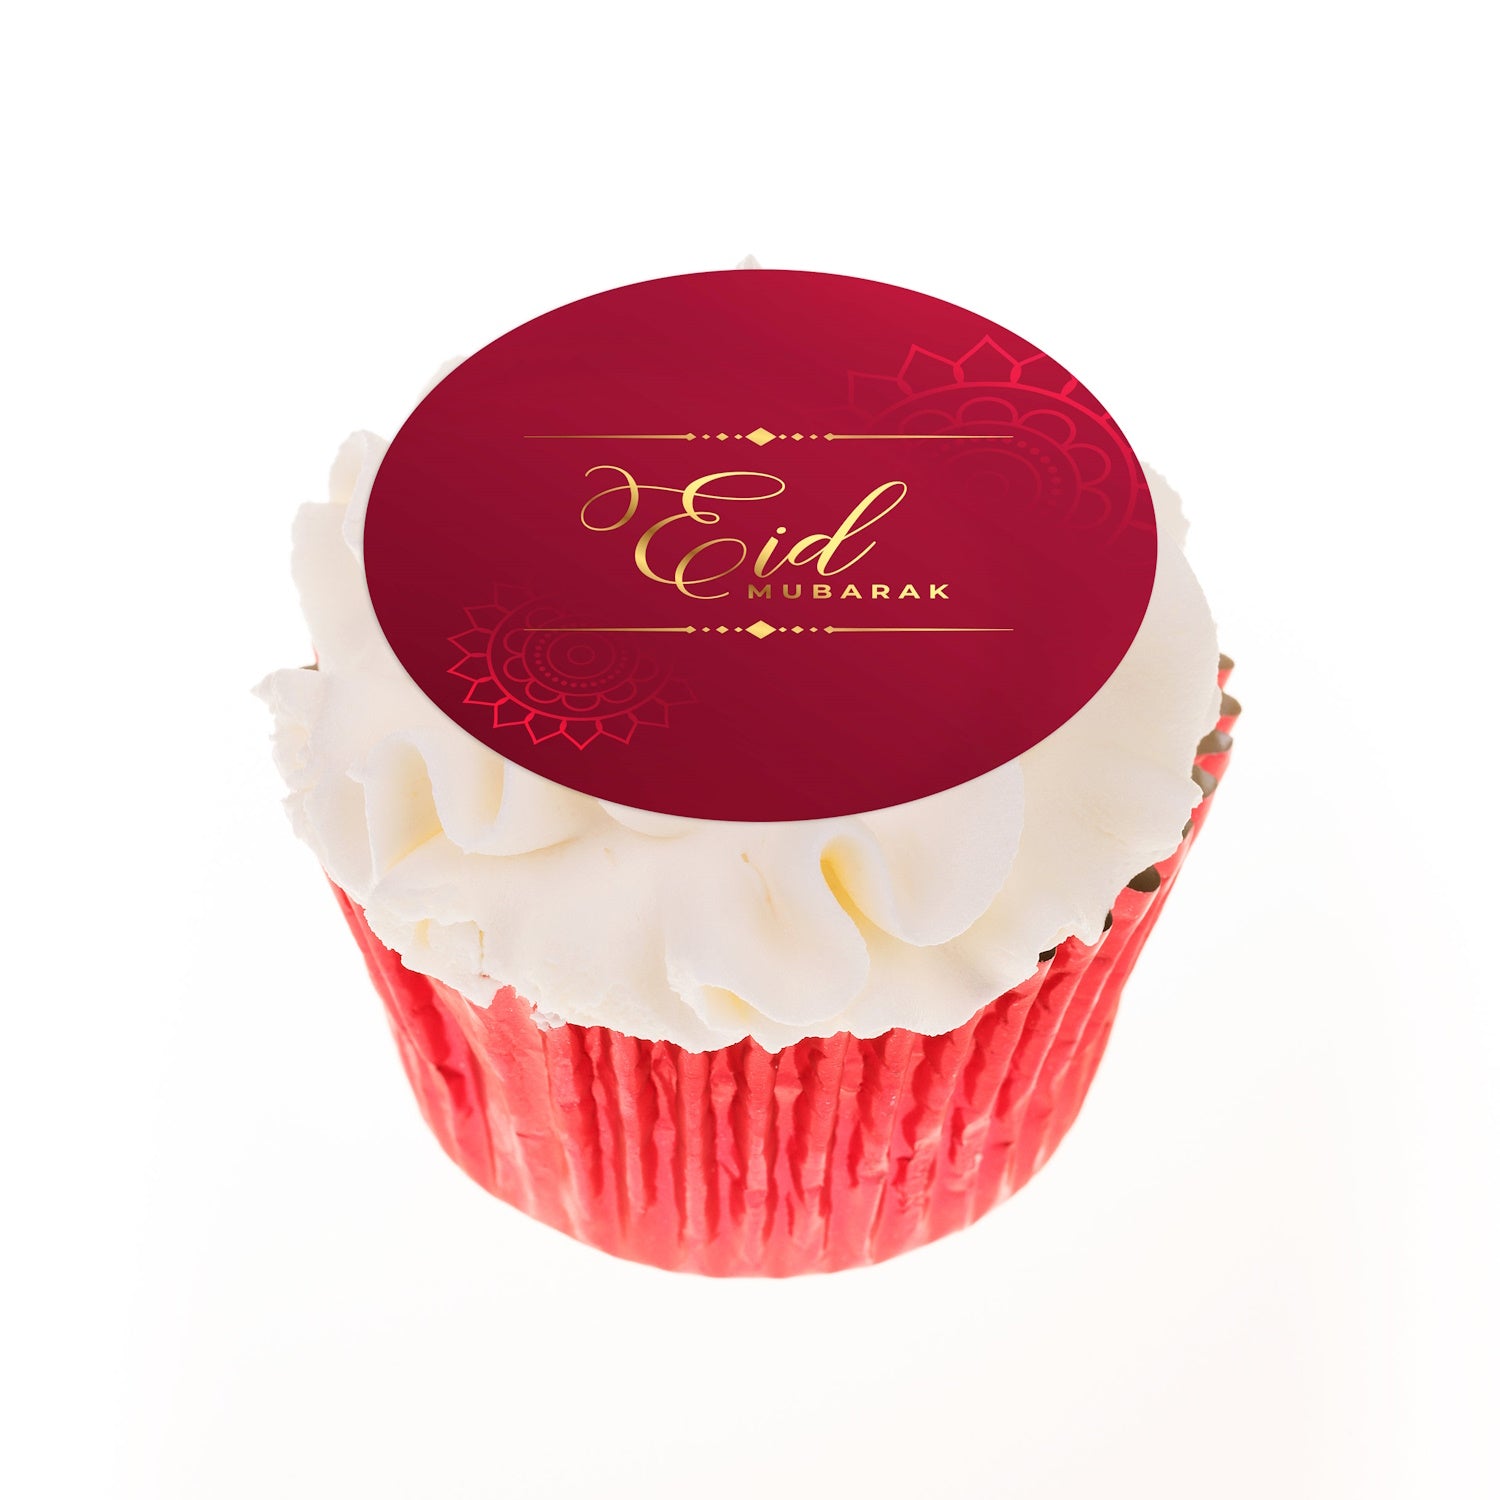 Red cupcake toppers designed for Eid - Eid Mubarak message